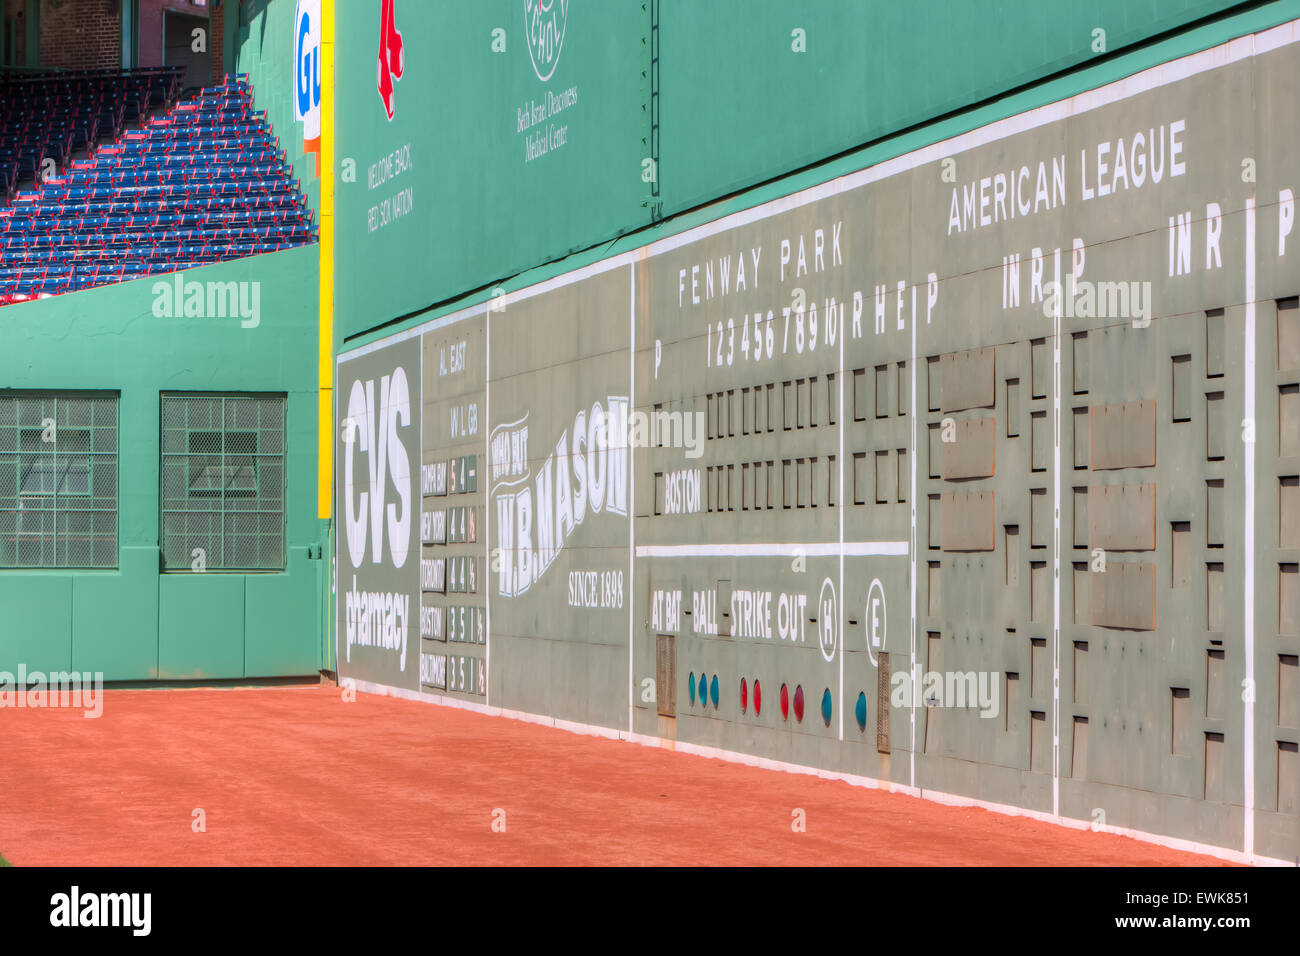 The Green Monster, the famed left field wall, towers over the field in iconic Fenway Park in Boston, Massachusetts. Stock Photo